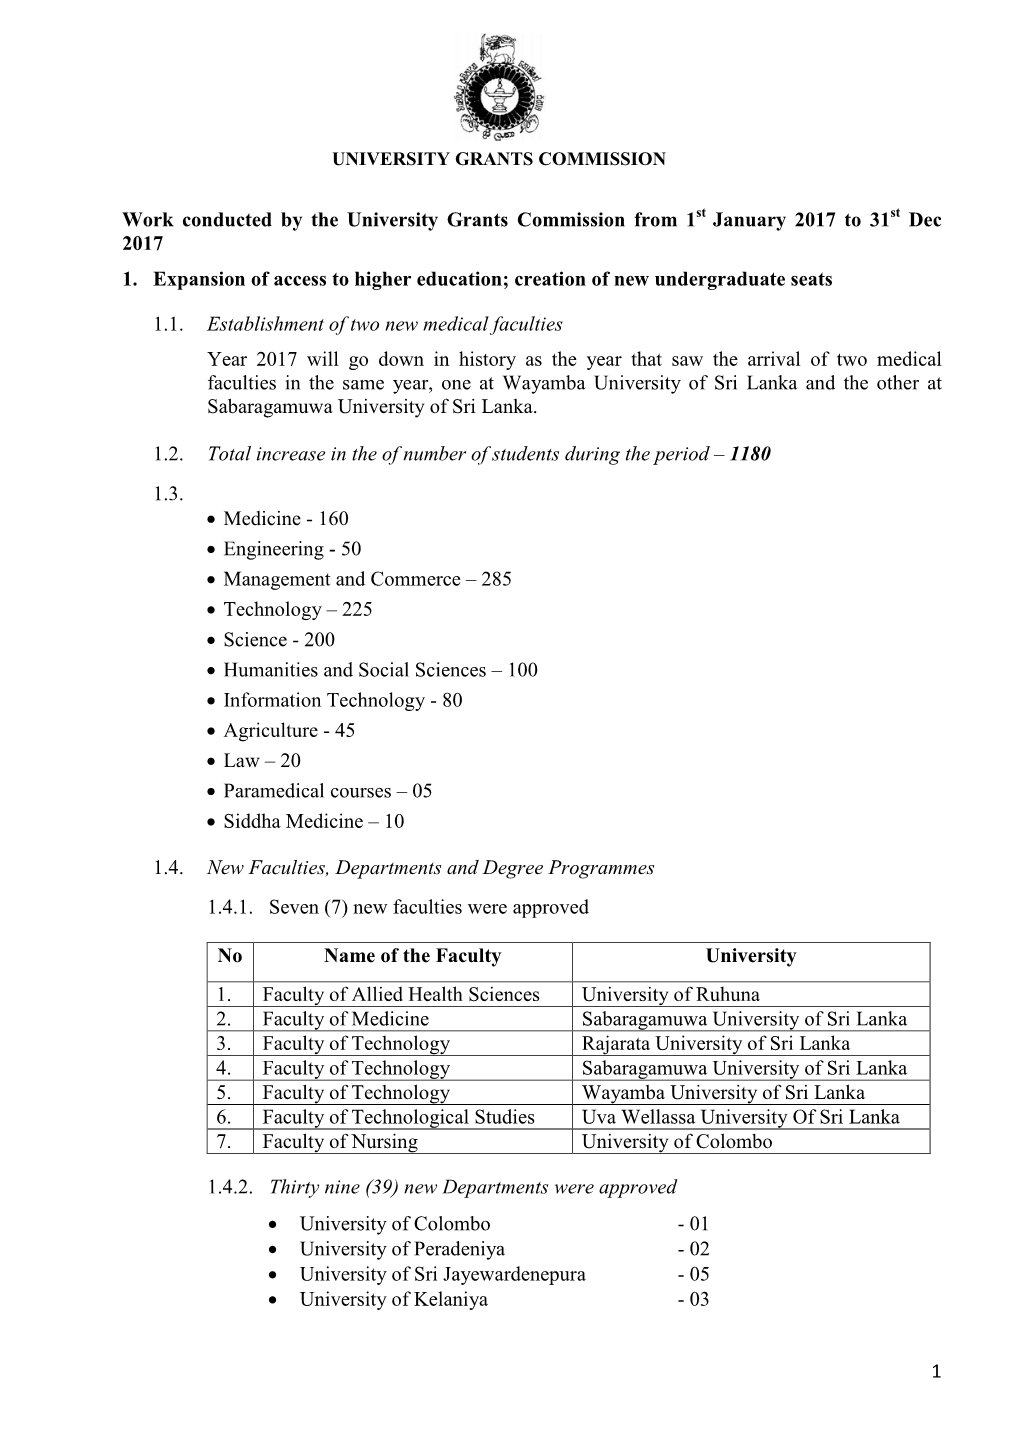 1 Work Conducted by the University Grants Commission from 1 January